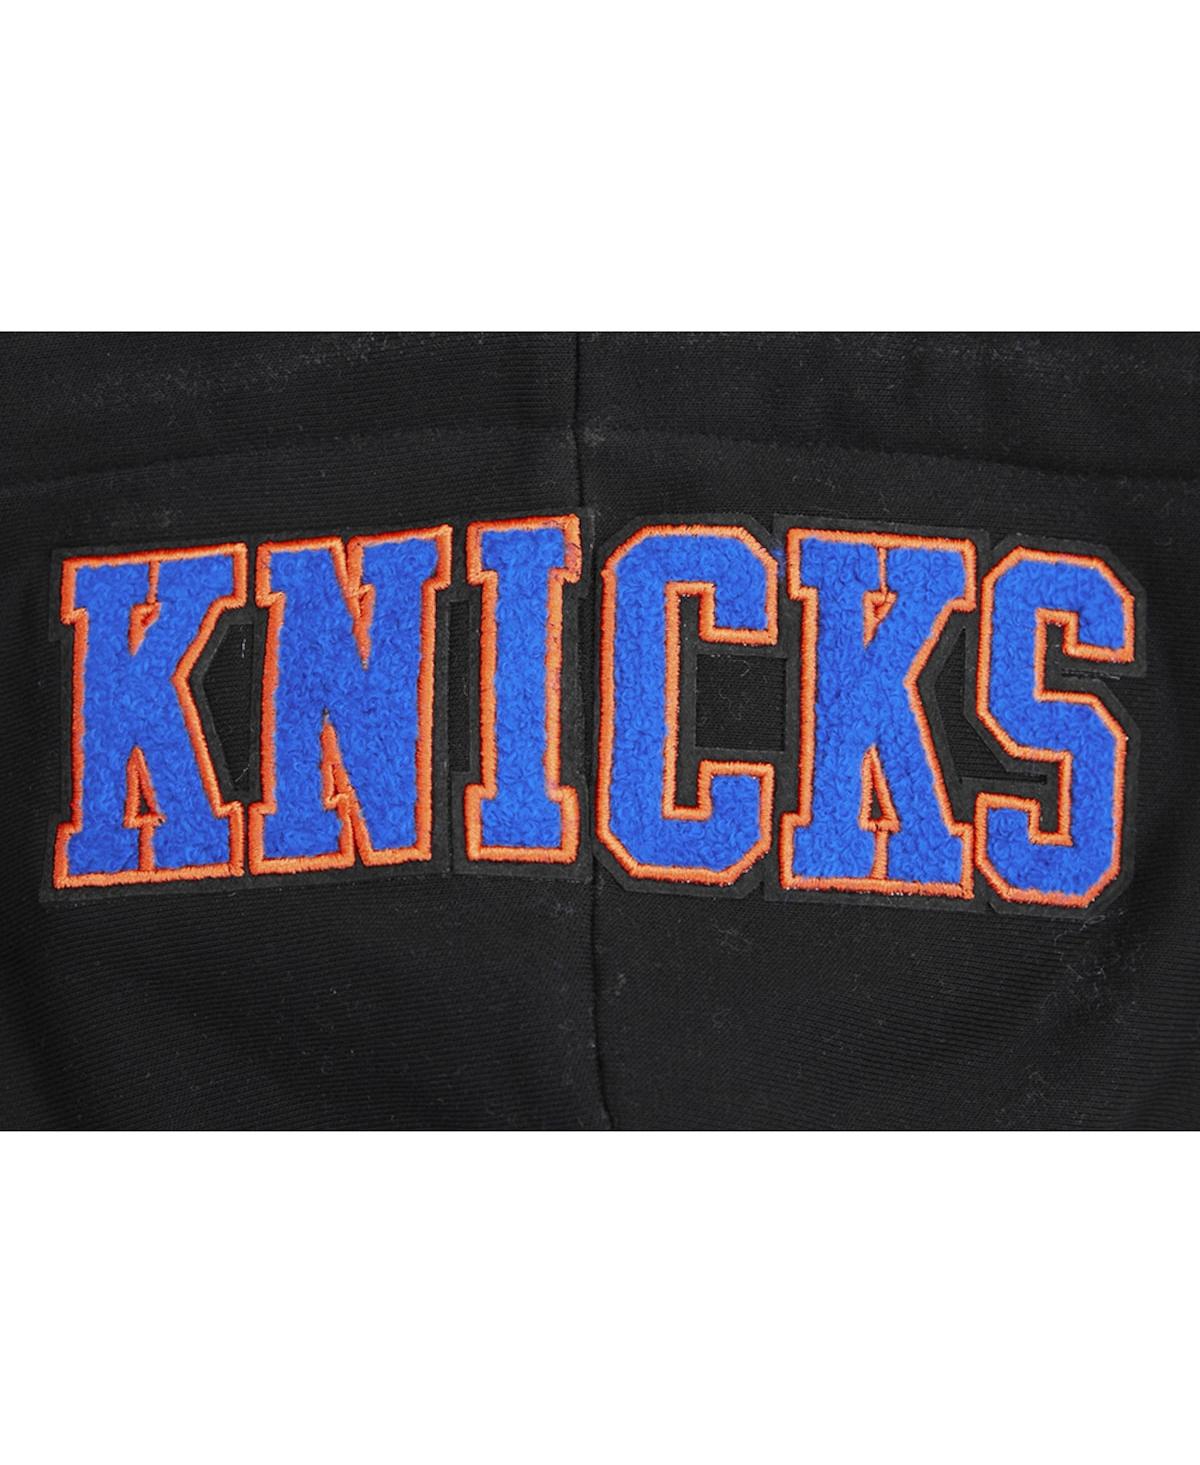 Shop Pro Standard Women's  Black New York Knicks 2023/24 City Edition Cropped Pullover Hoodie